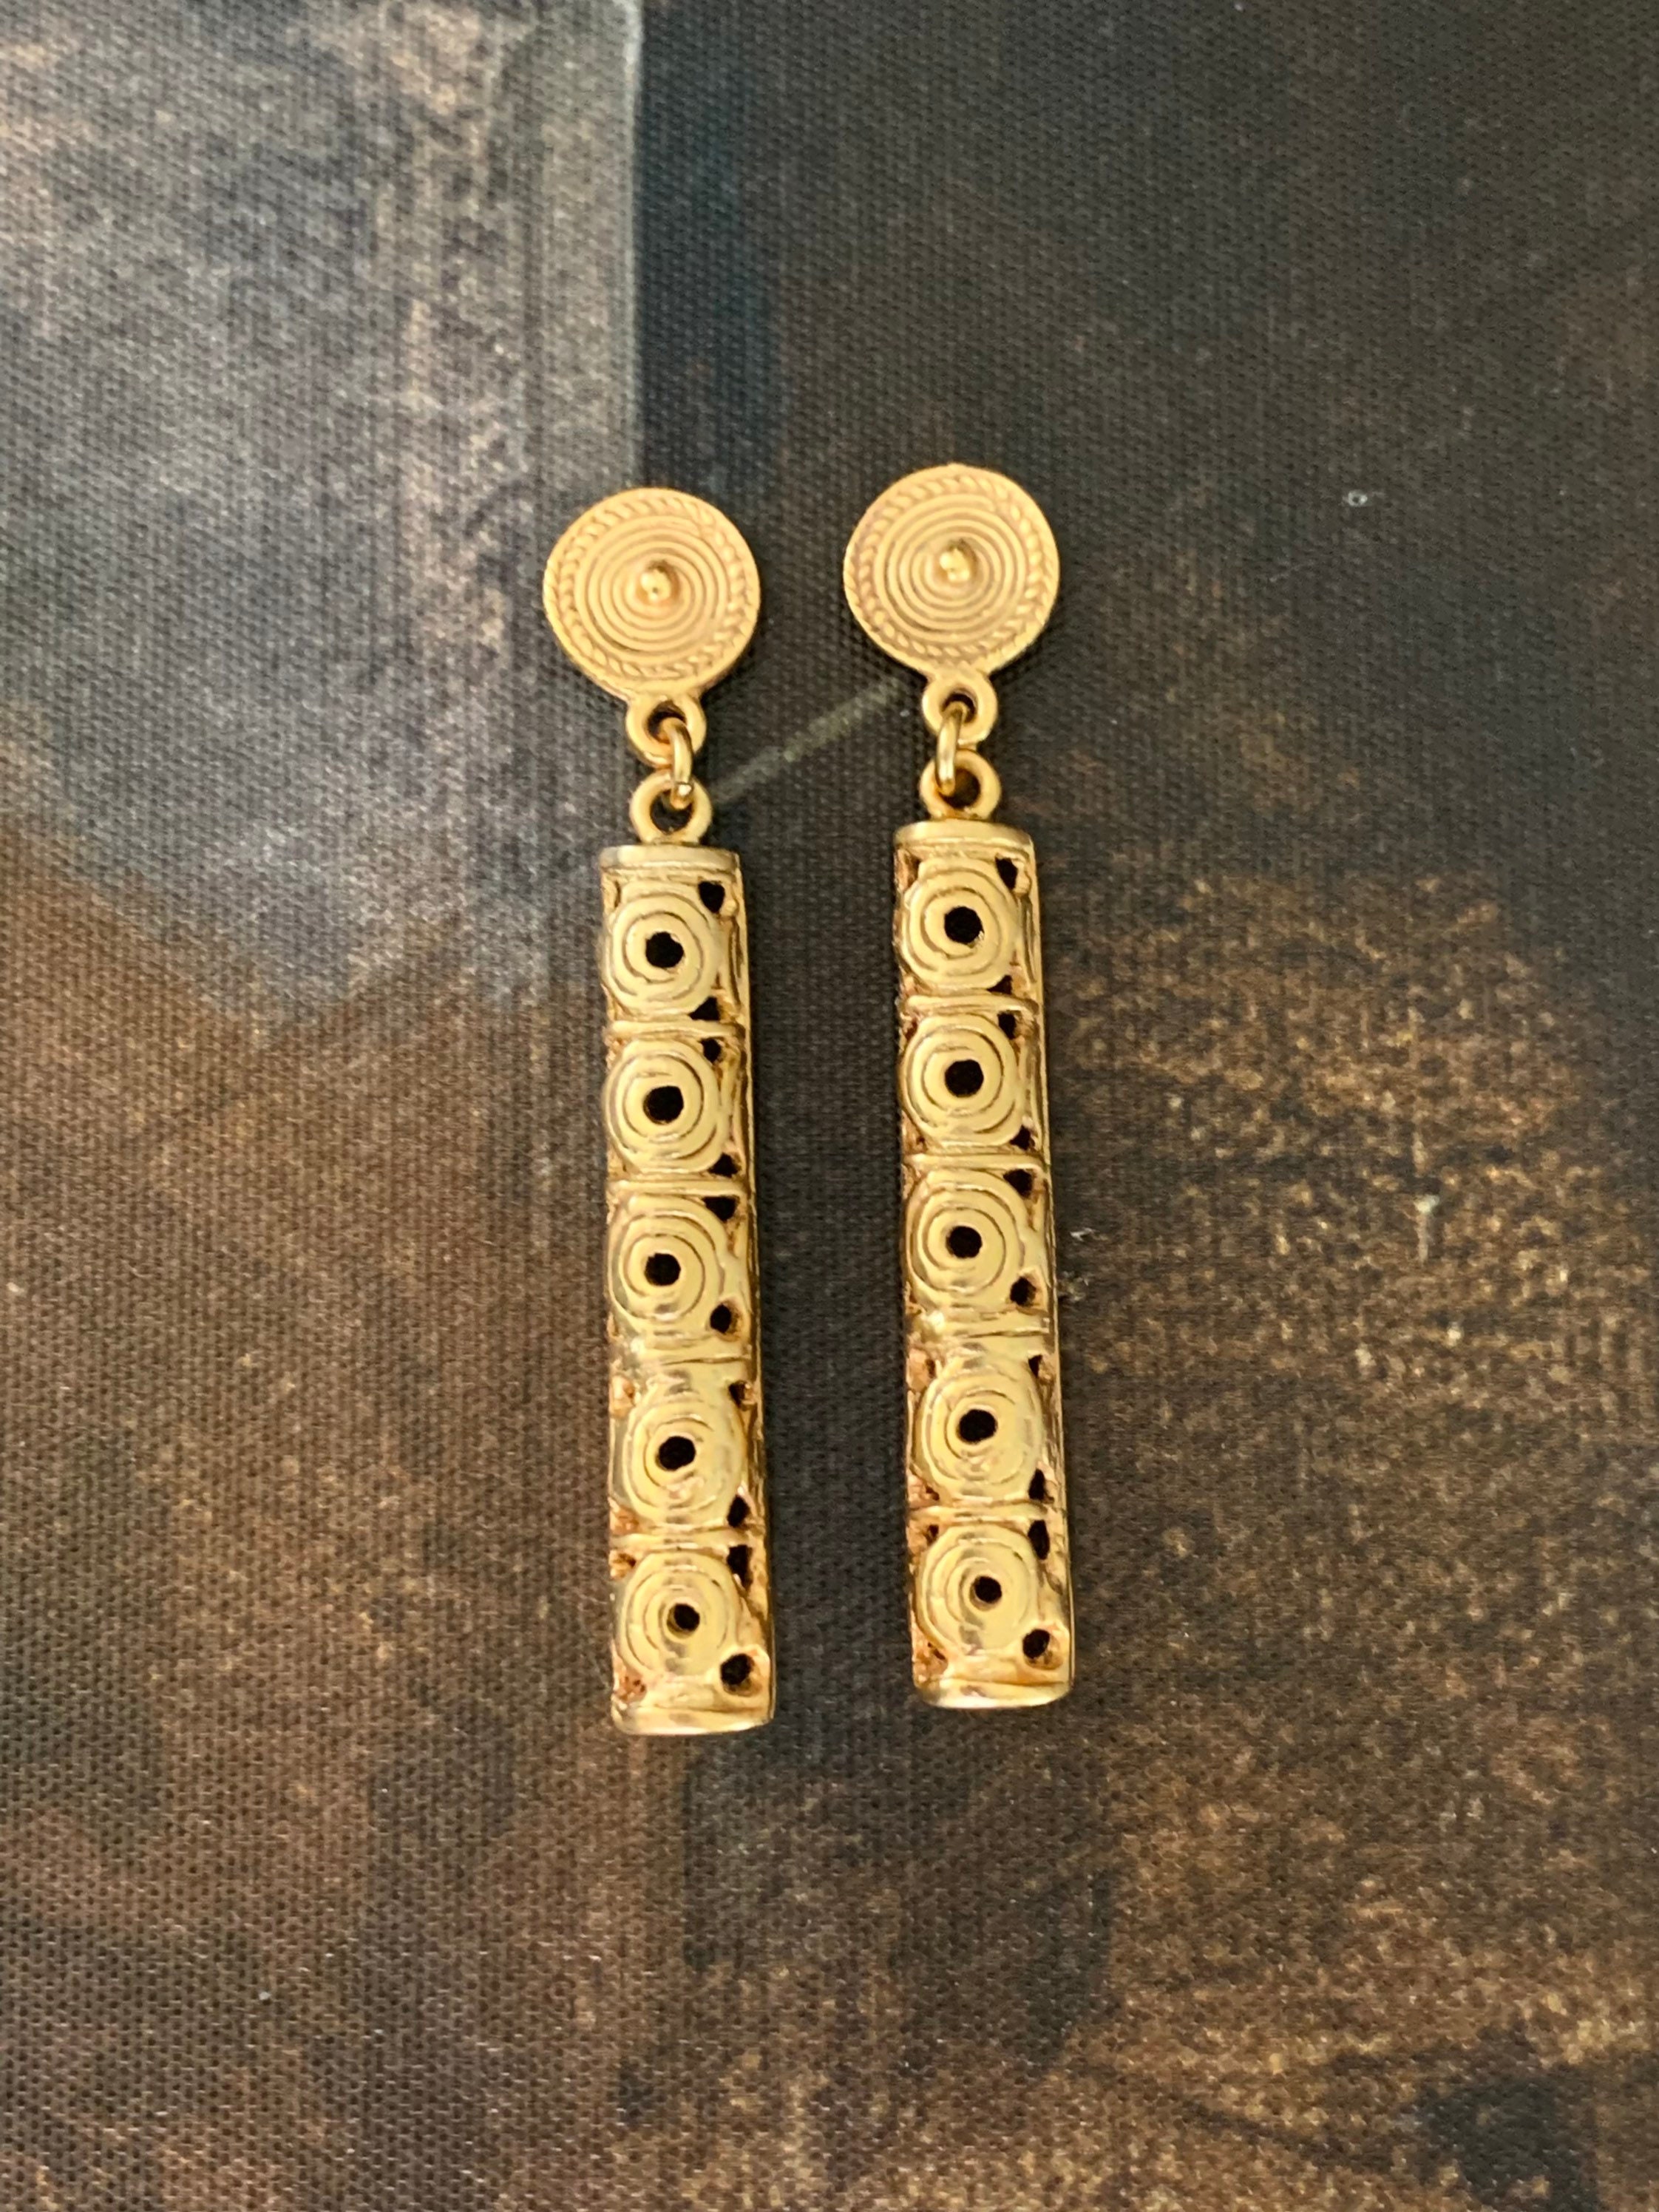 Details about   24k Gold Plated Pre-Colombian Hammered Coin  Earrings  22 